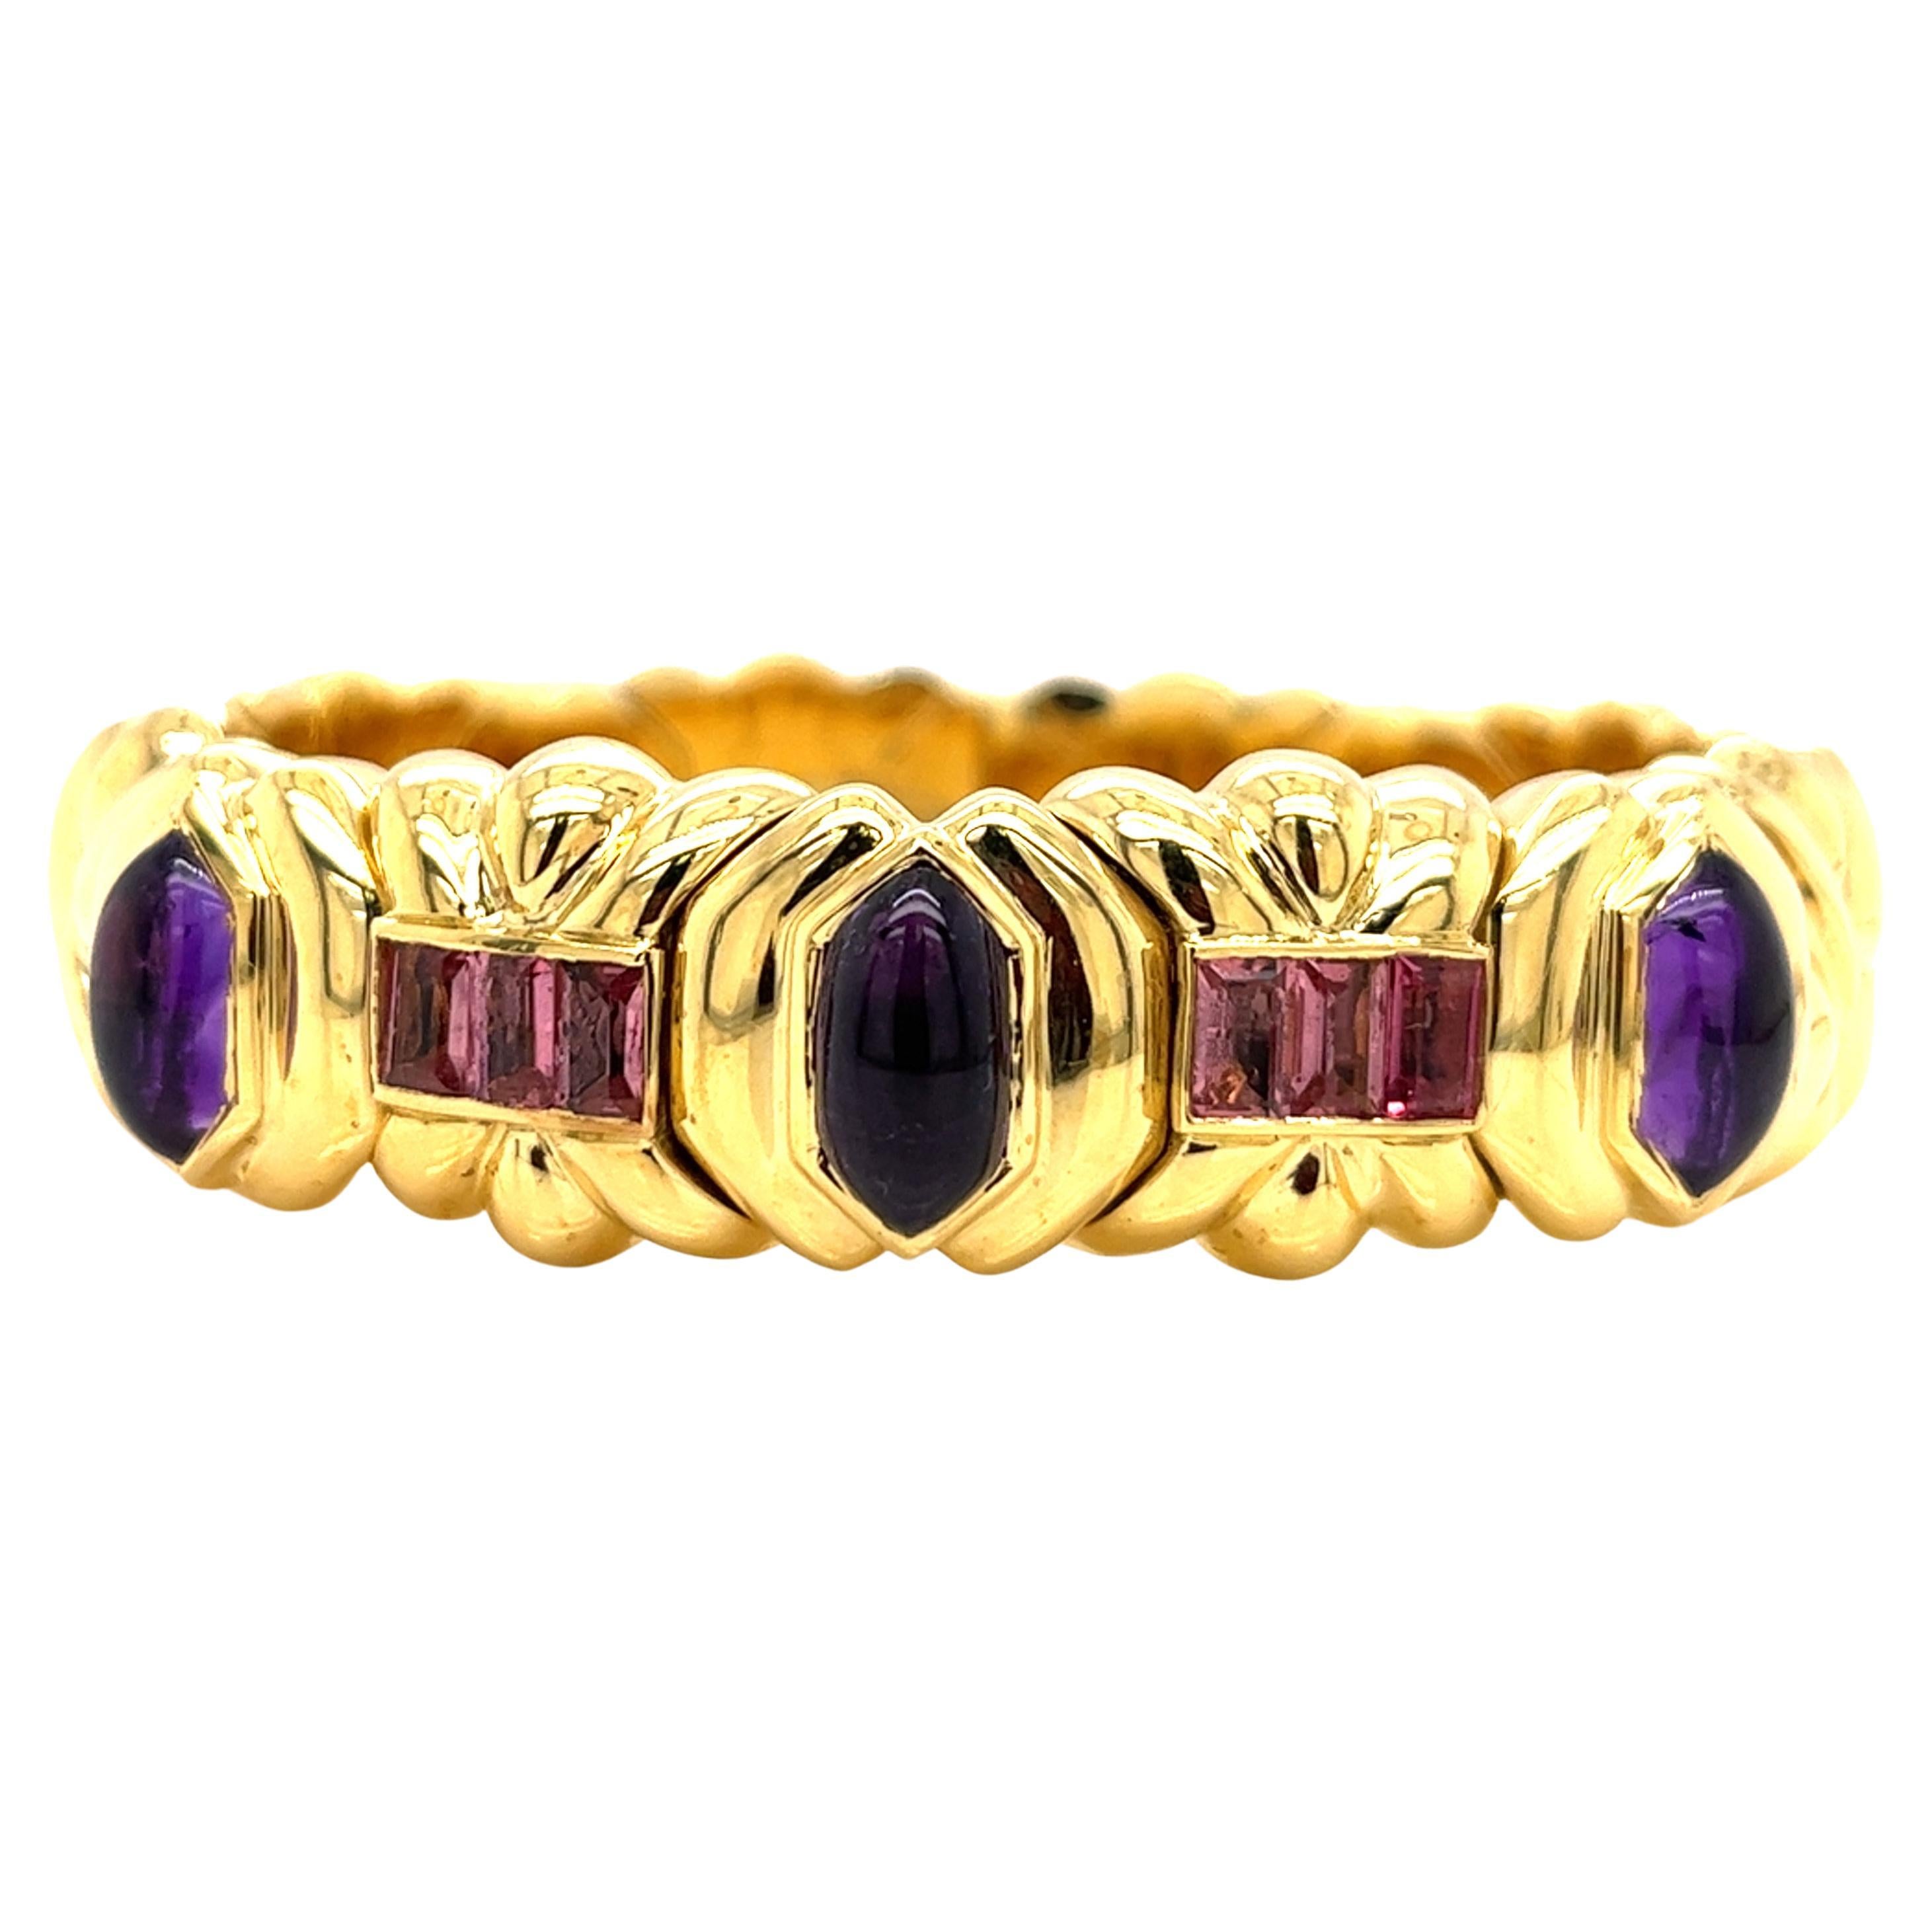 18Kt Yellow Gold Bracelet with Amethyst and Tourmaline. Total Weights 72 grams